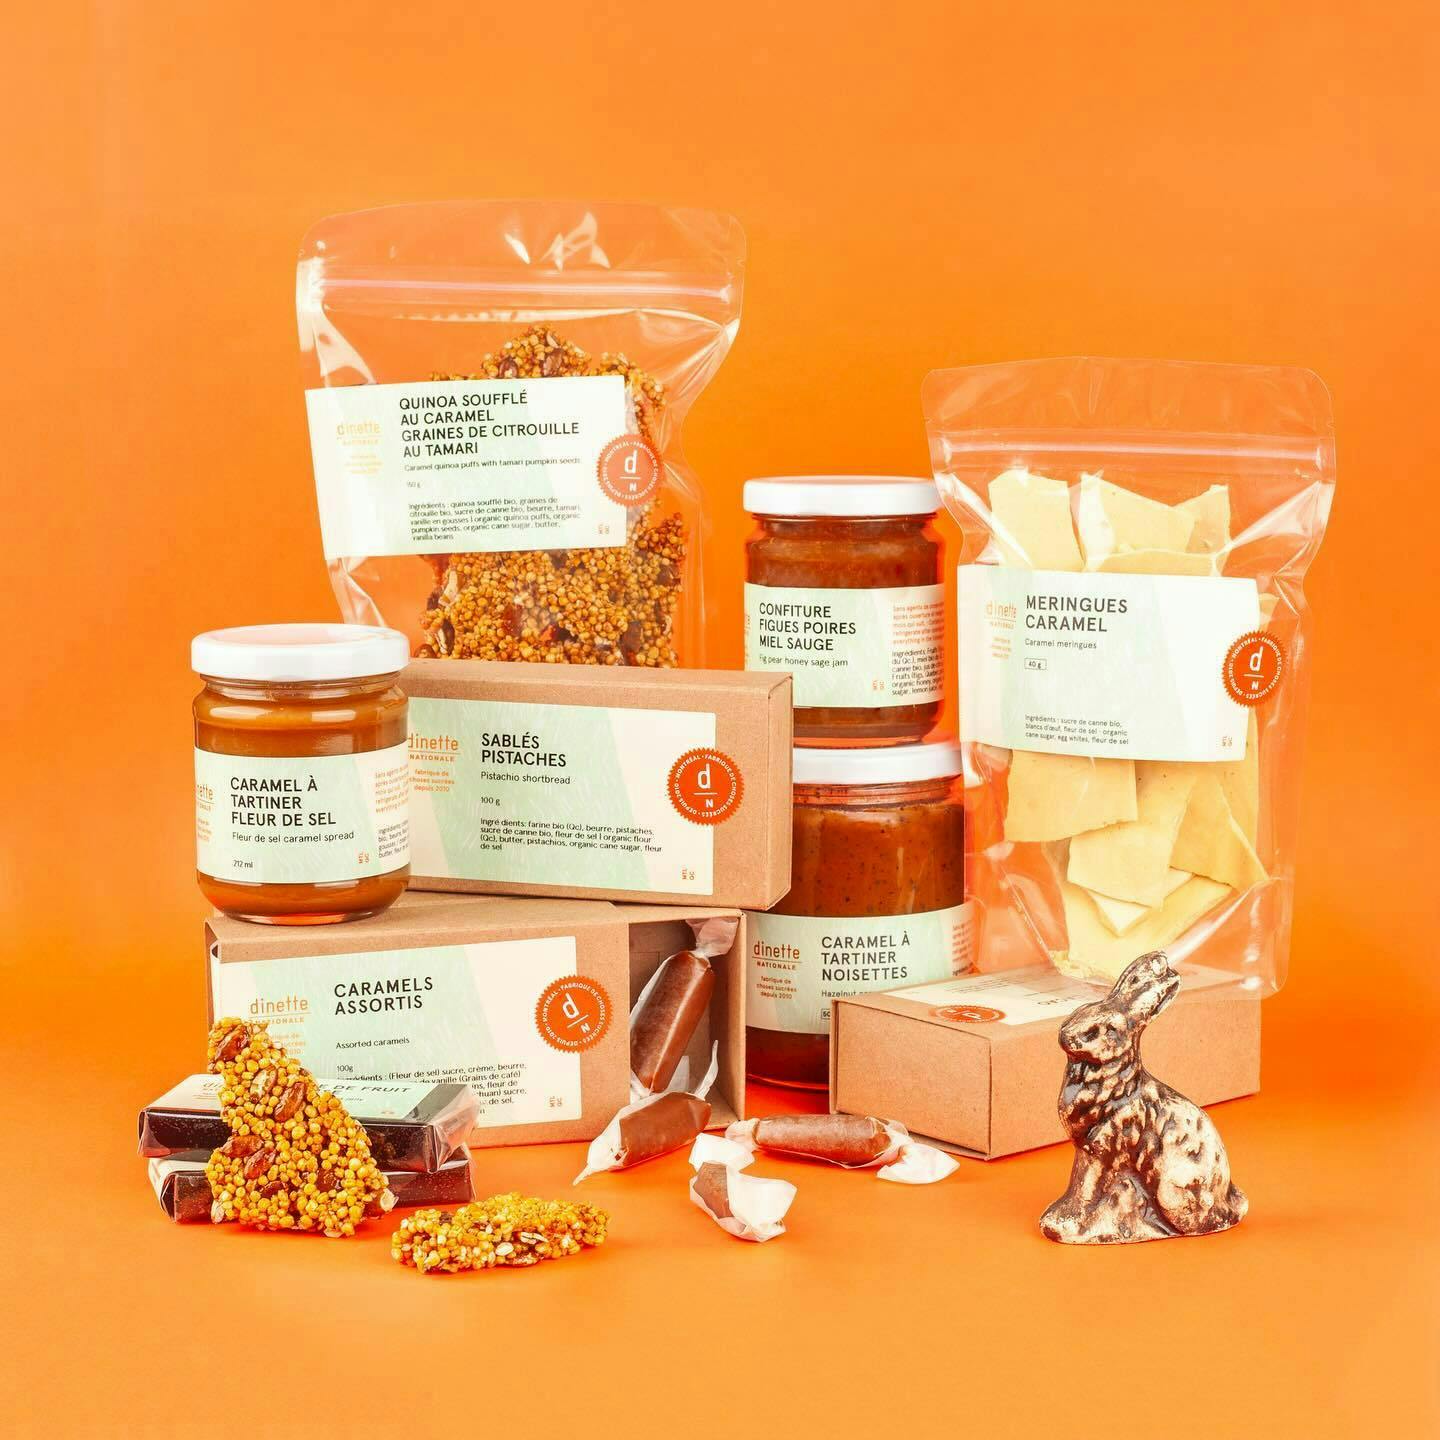 Various Dinette Nationale products against an orange background